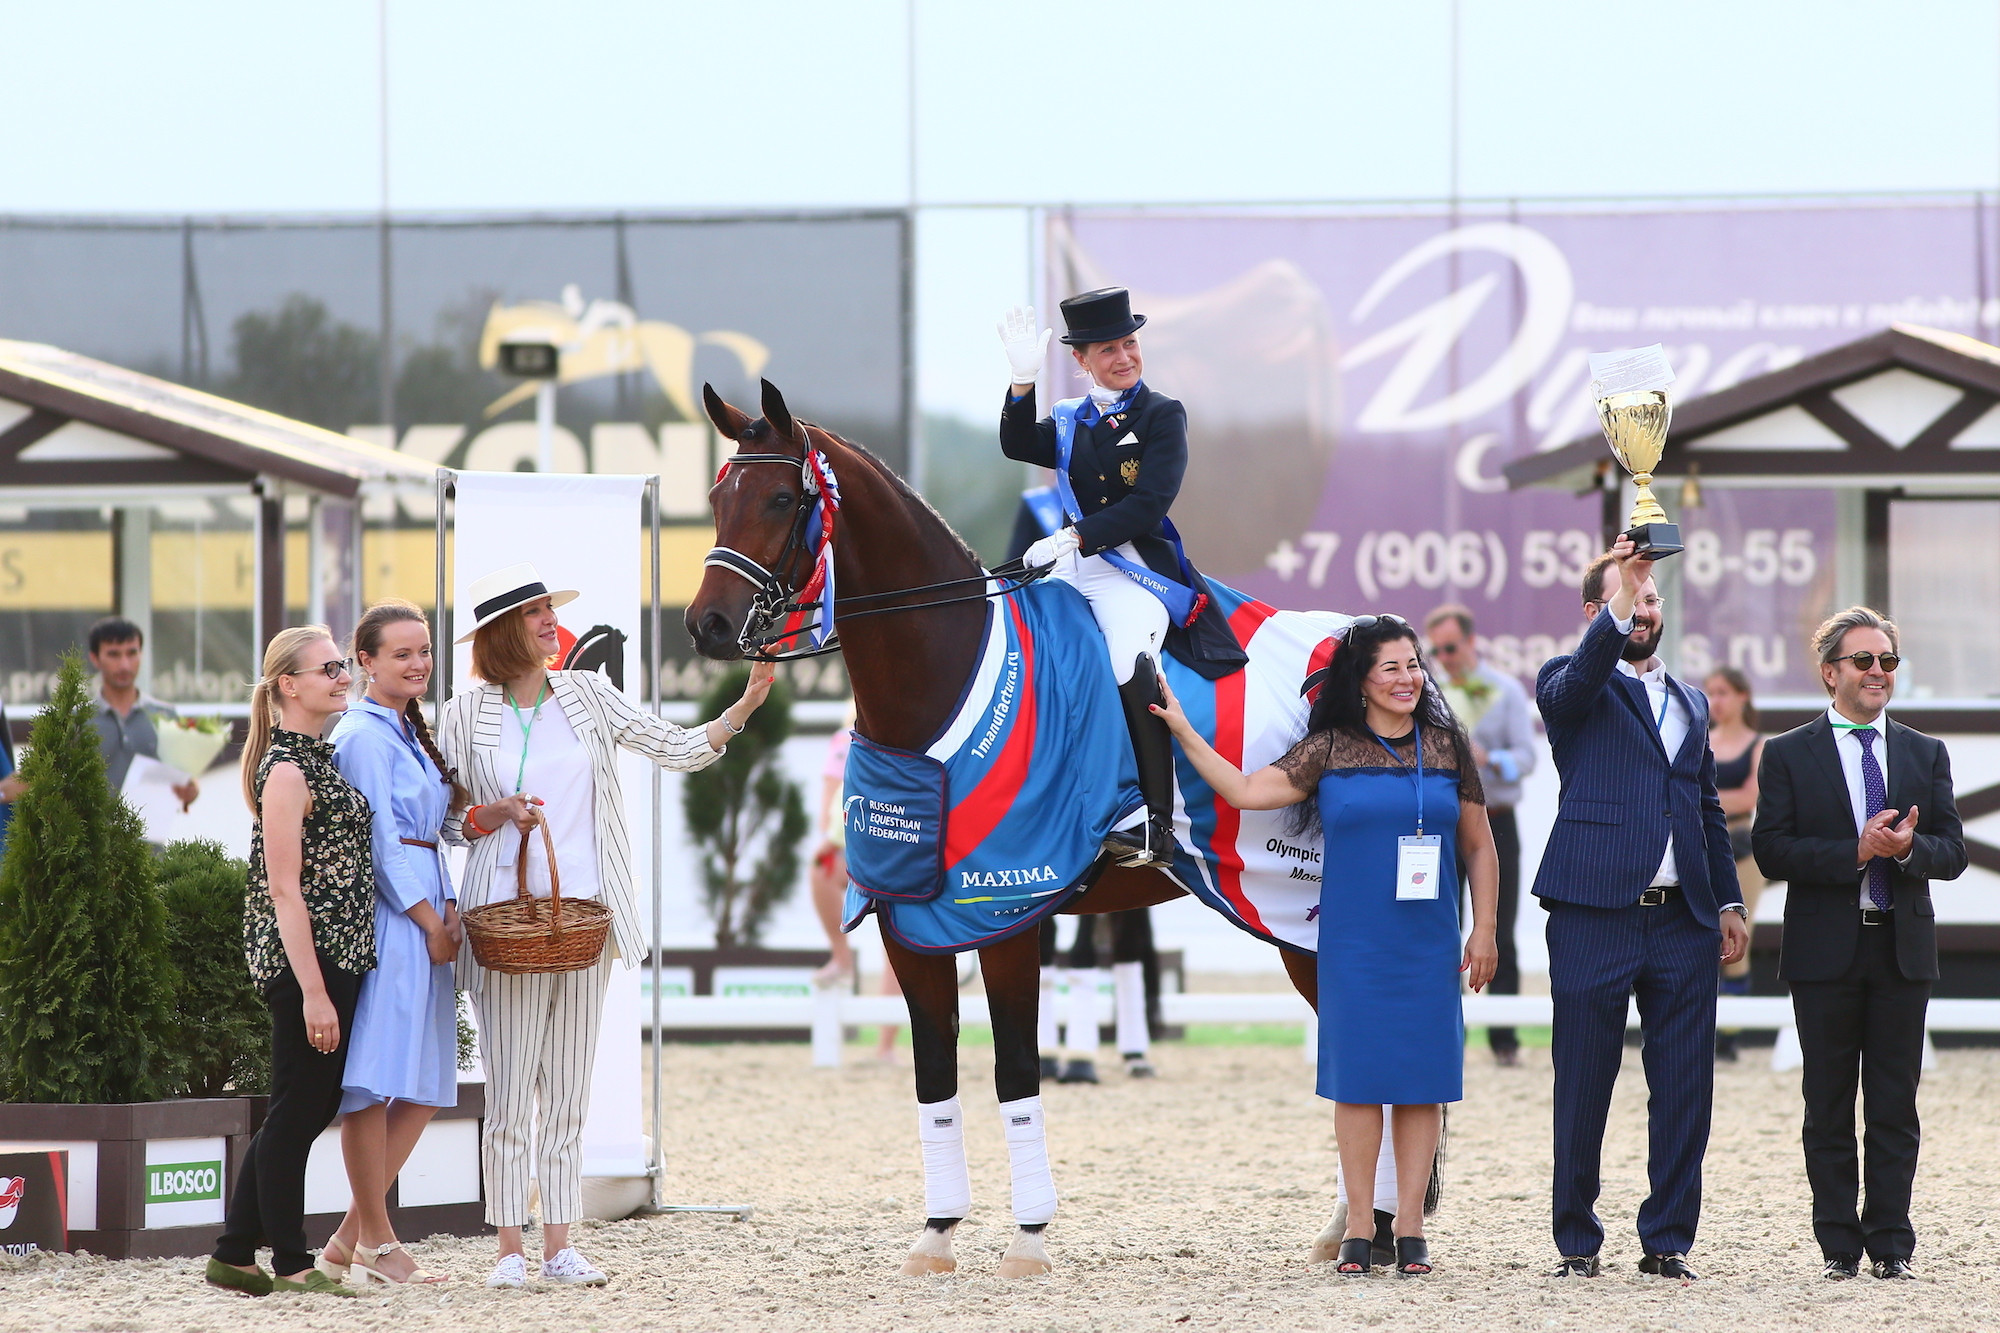 Russia qualify dressage team for Tokyo 2020